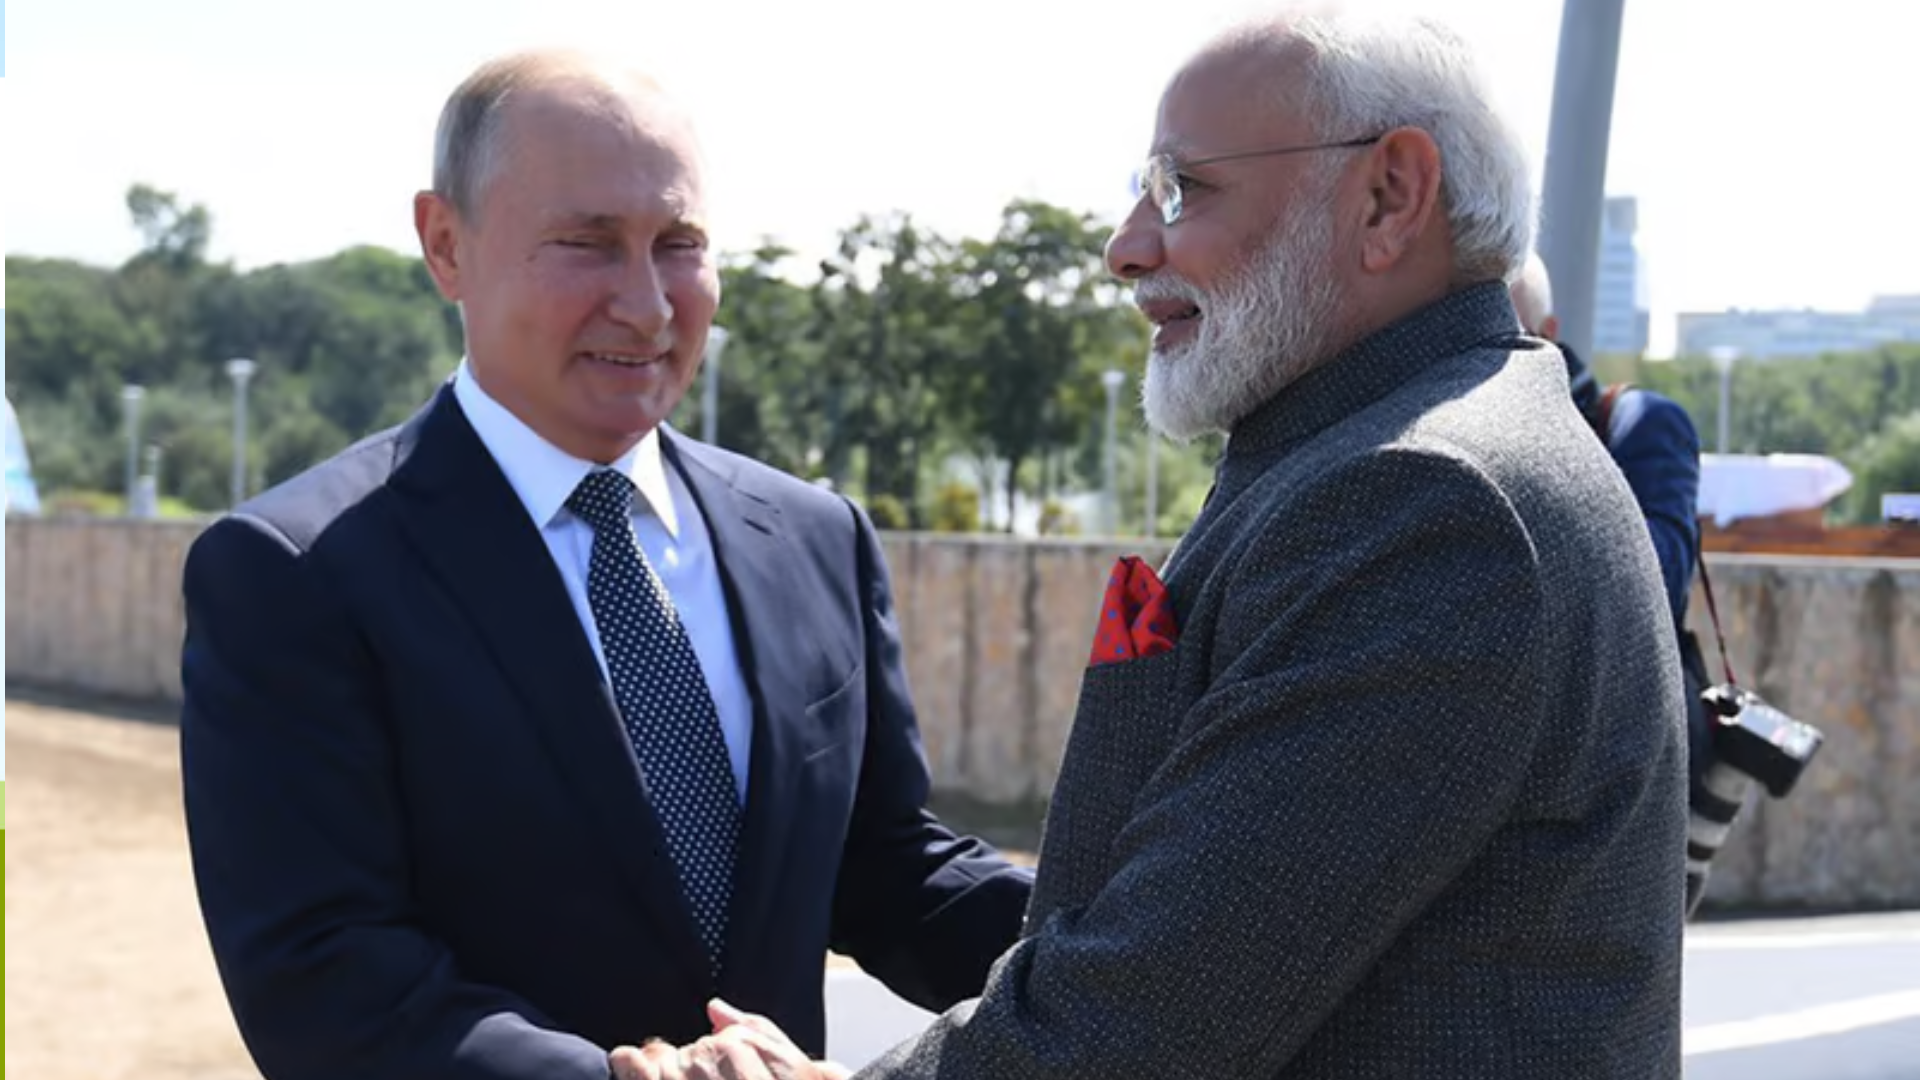 ‘Look forward to strengthening time-tested partnership’:PM Modi congratulates Putin on re-election